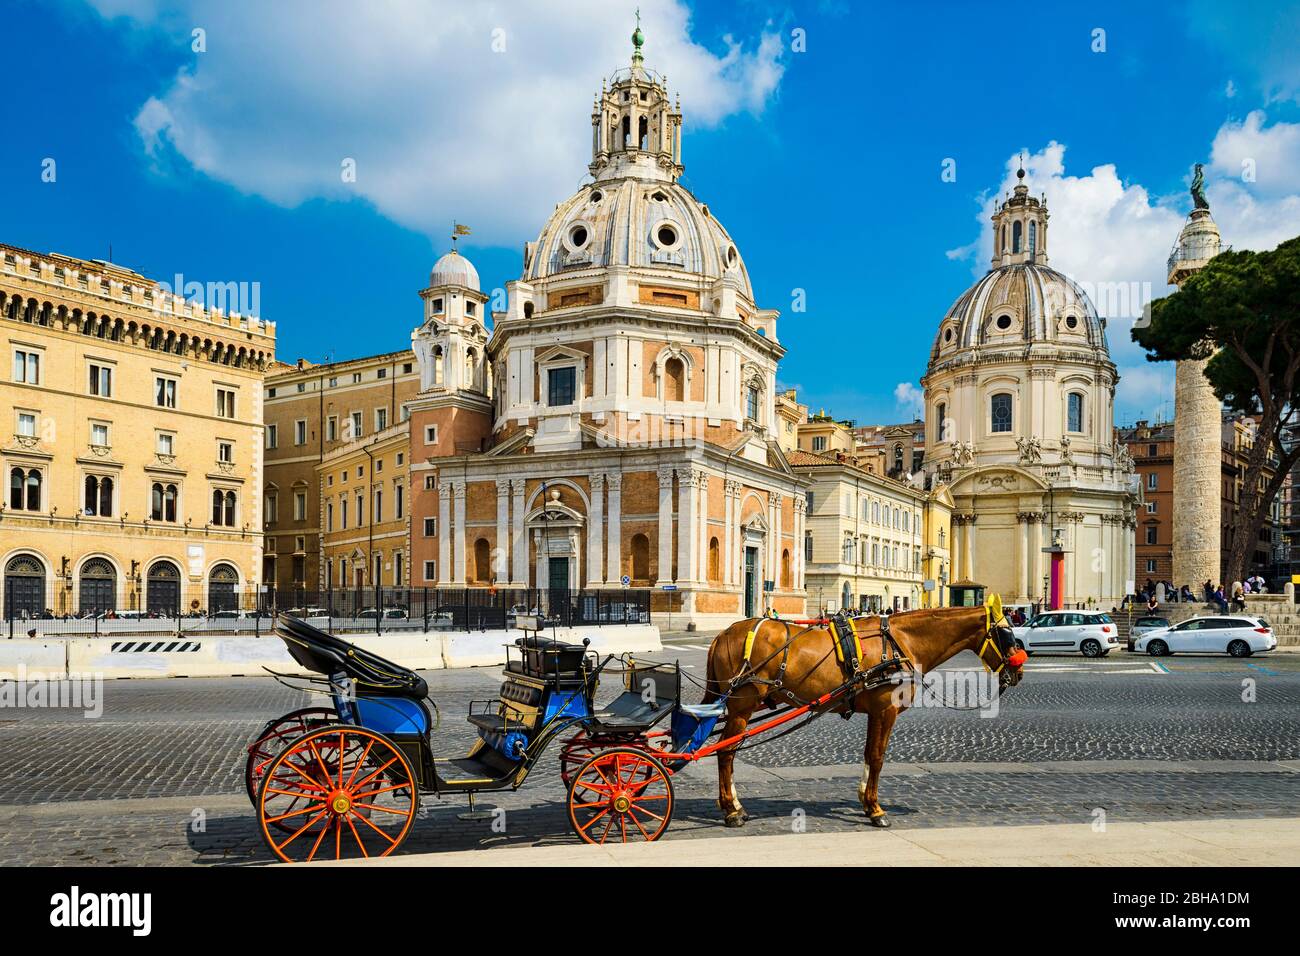 Horse-drawn carriage in front of historic building in Rome, Italy Stock Photo